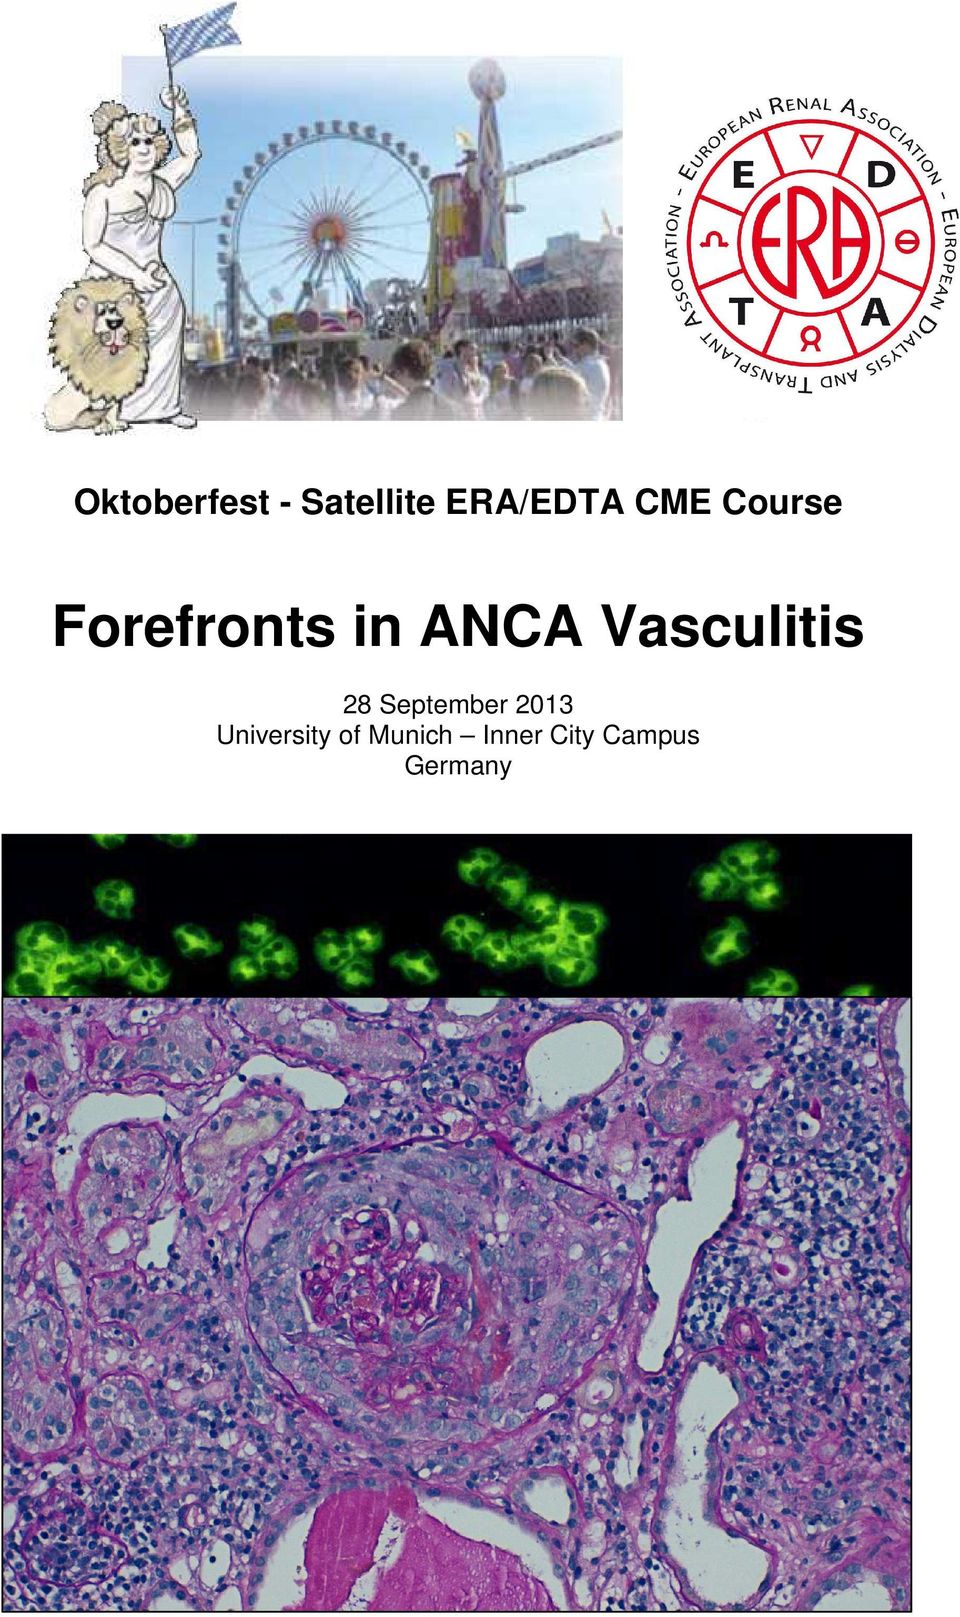 Forefronts in ANCA Vasculitis